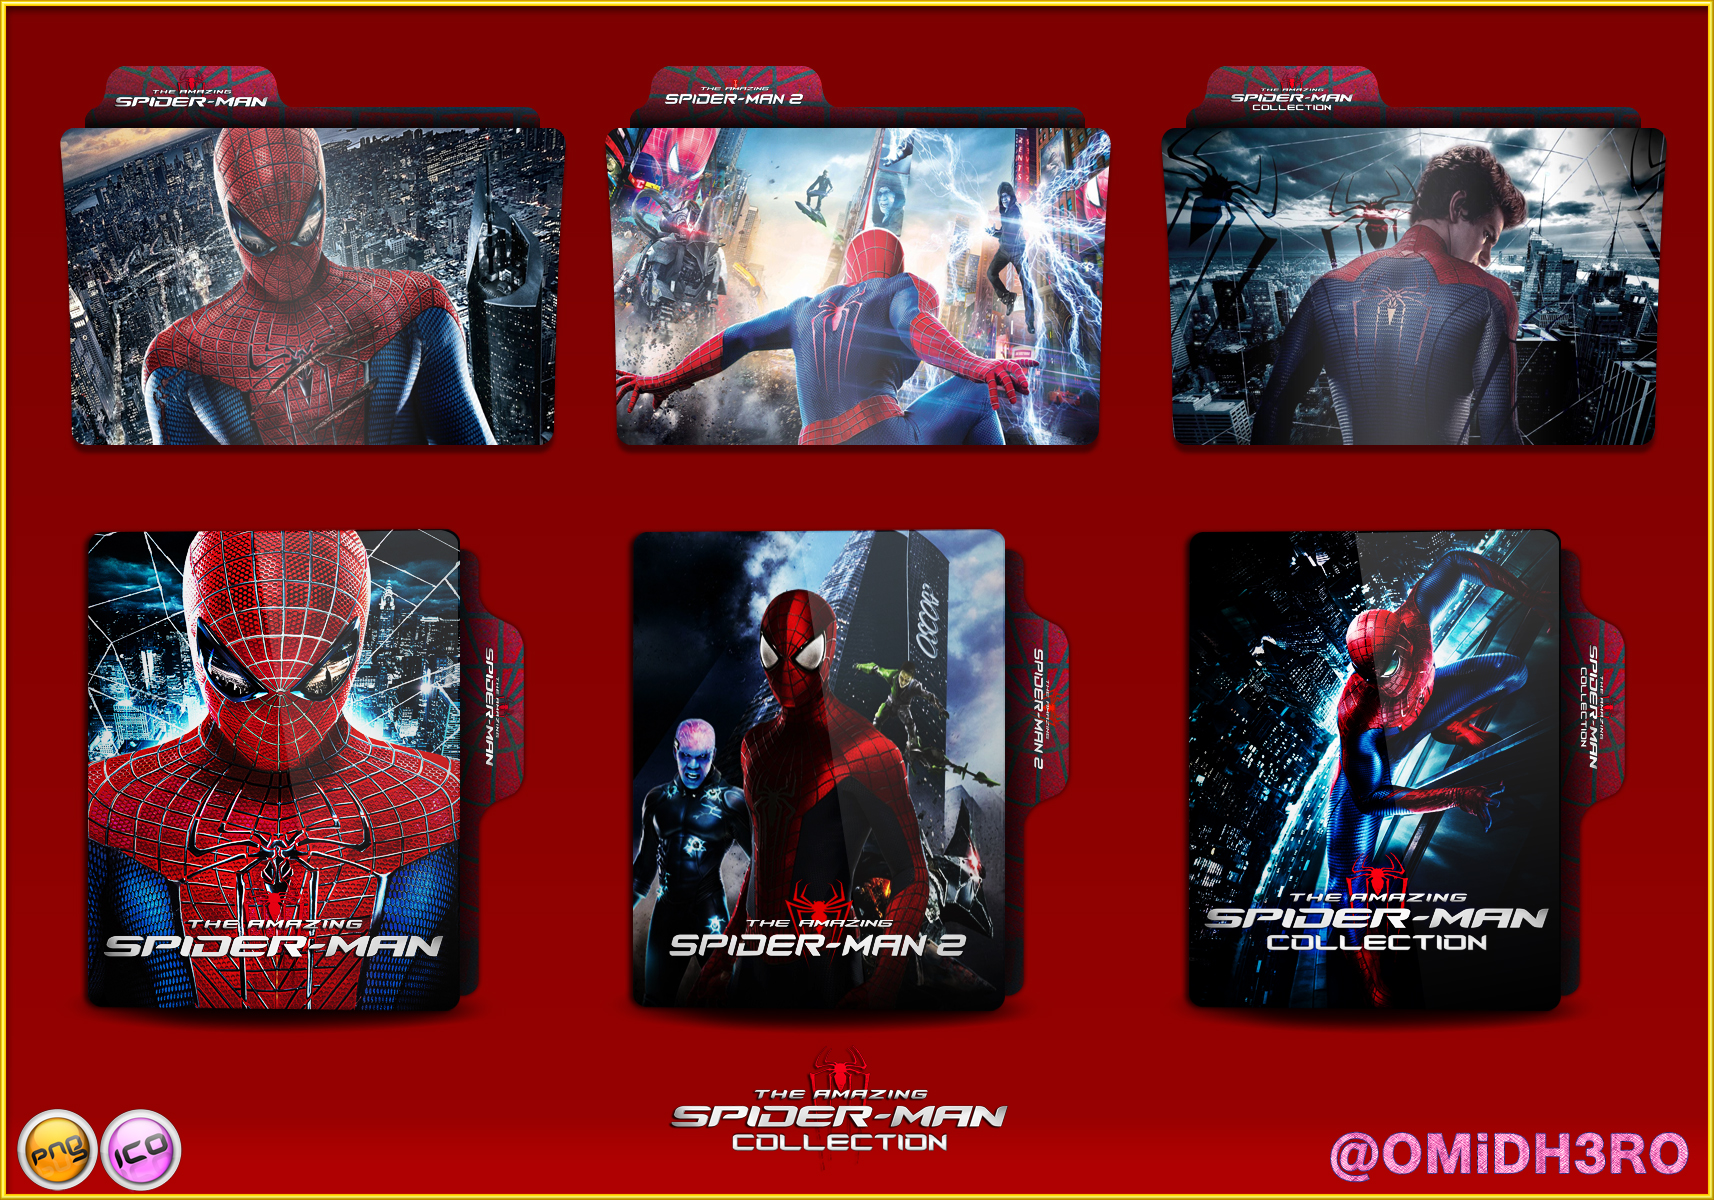 The Amazing Spider-Man Collection Folder Icon by OMiDH3RO on DeviantArt